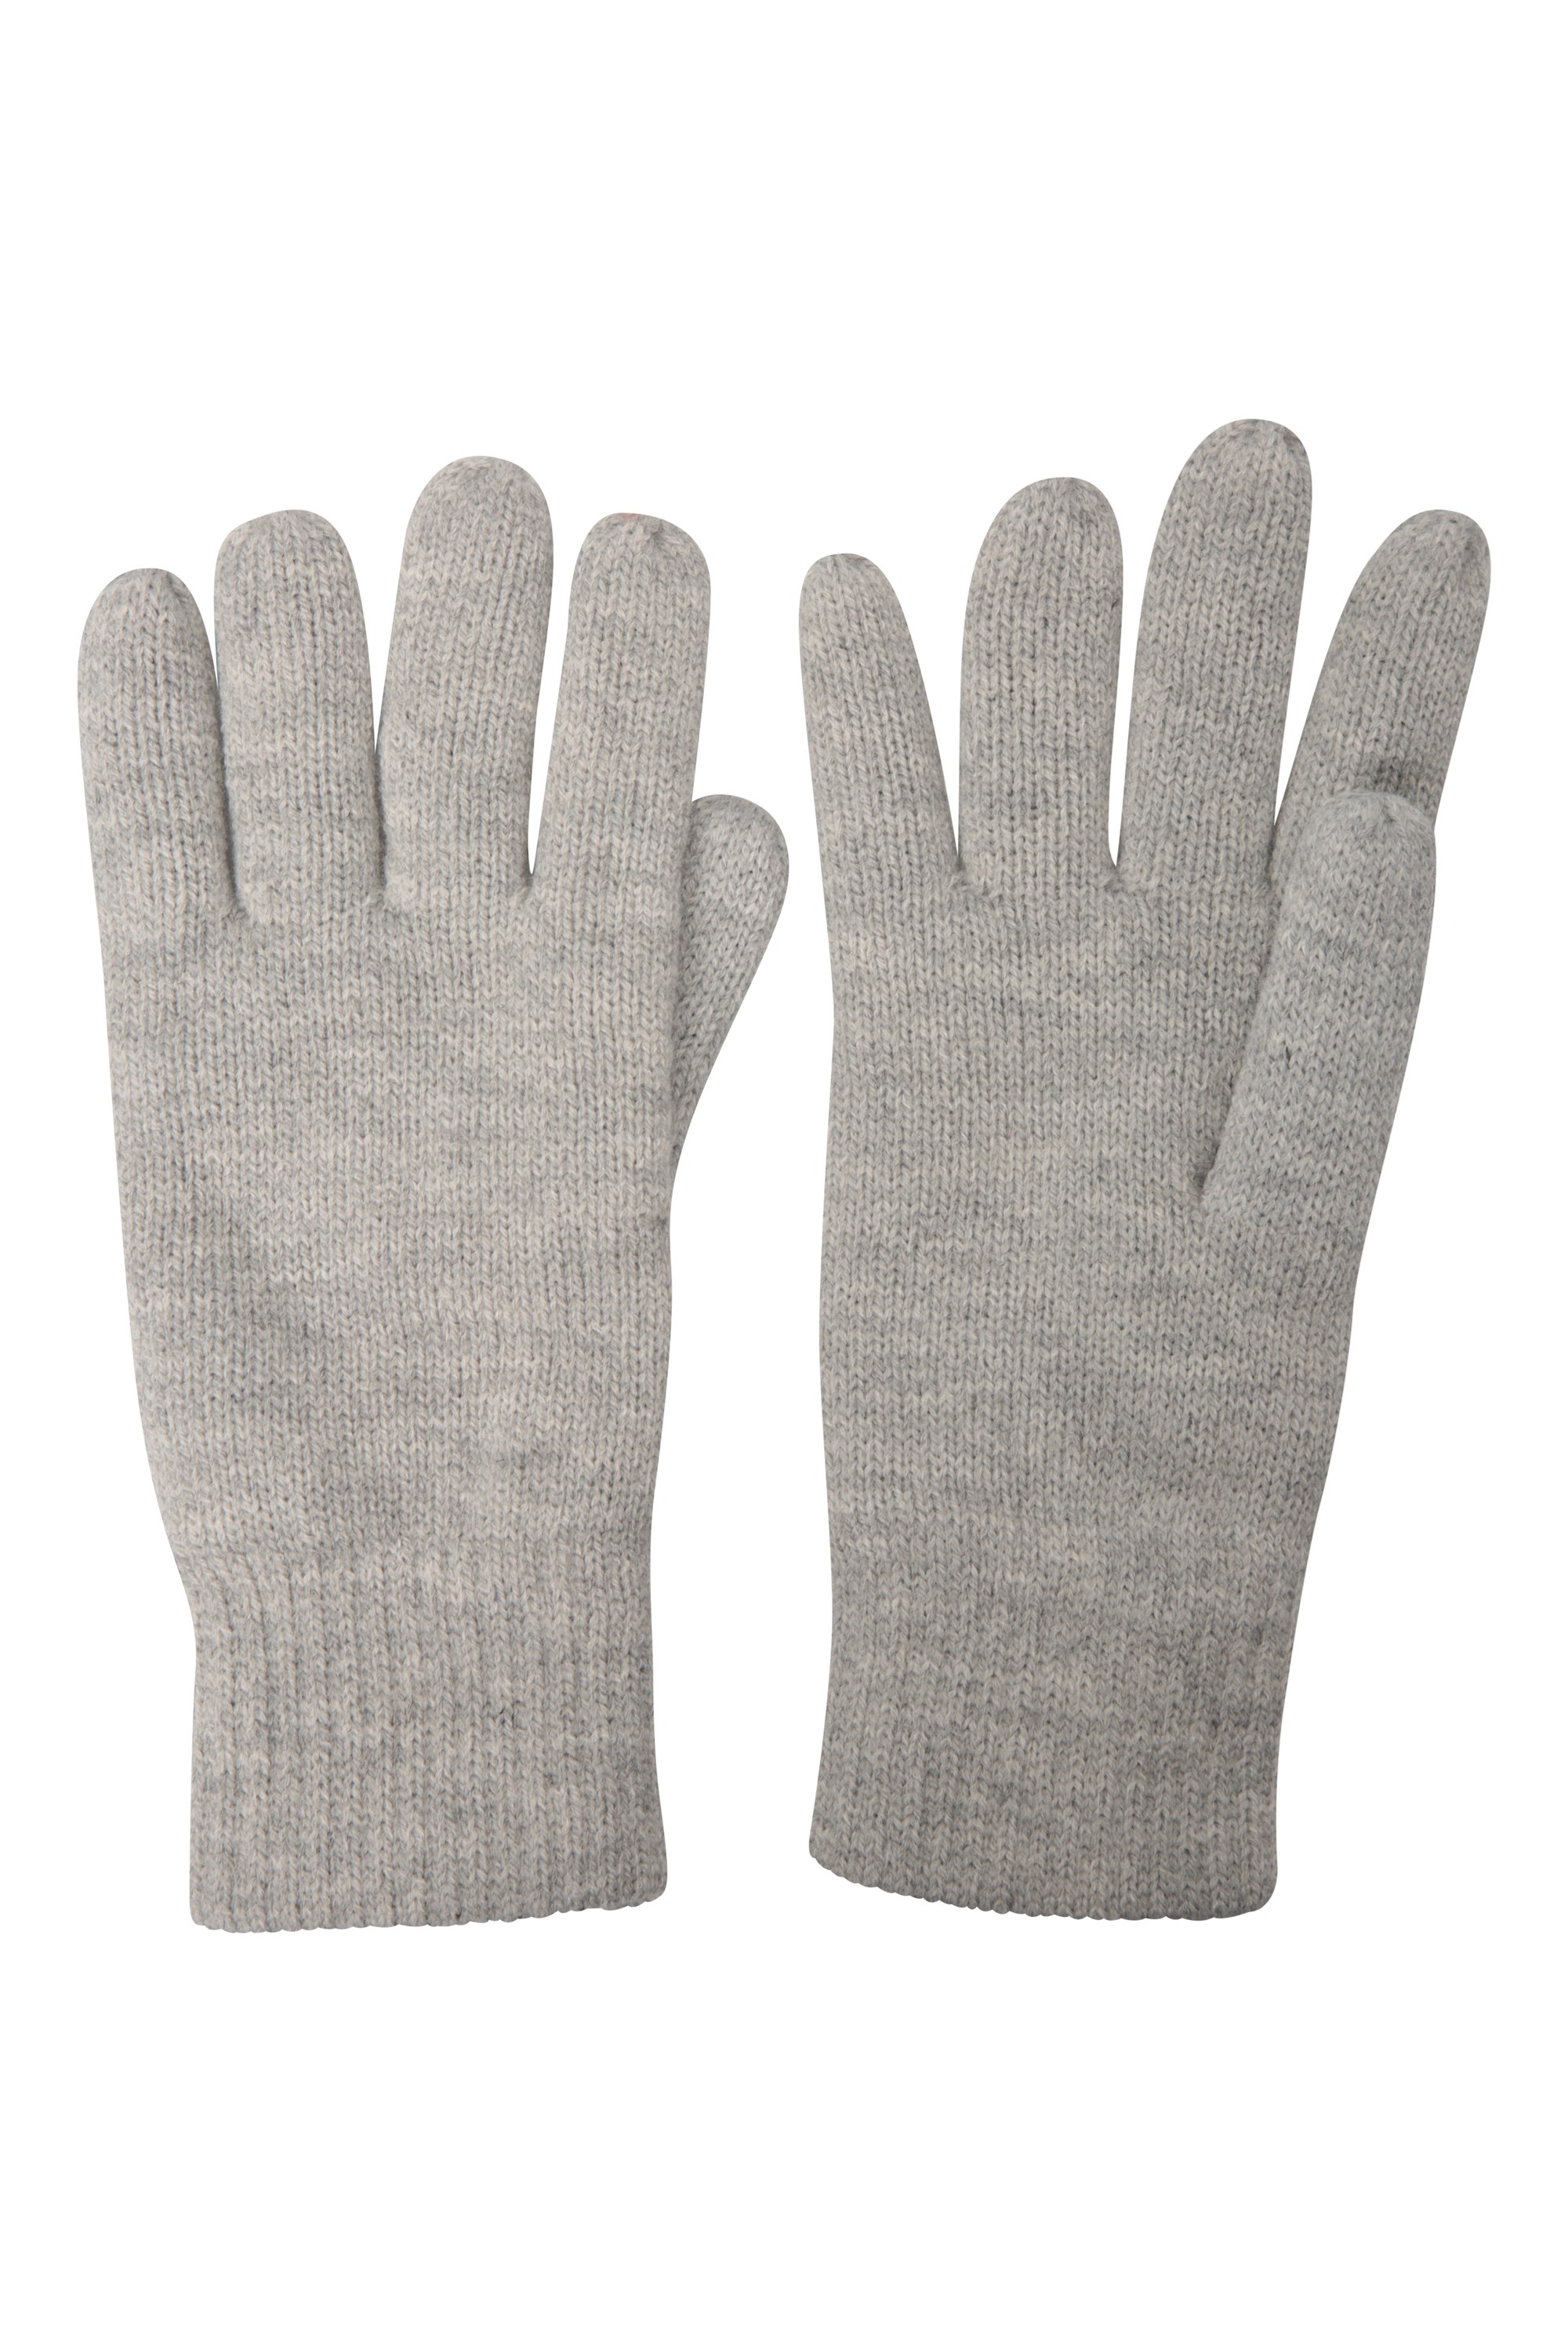 Thinsulate Womens Knitted Gloves - Grey